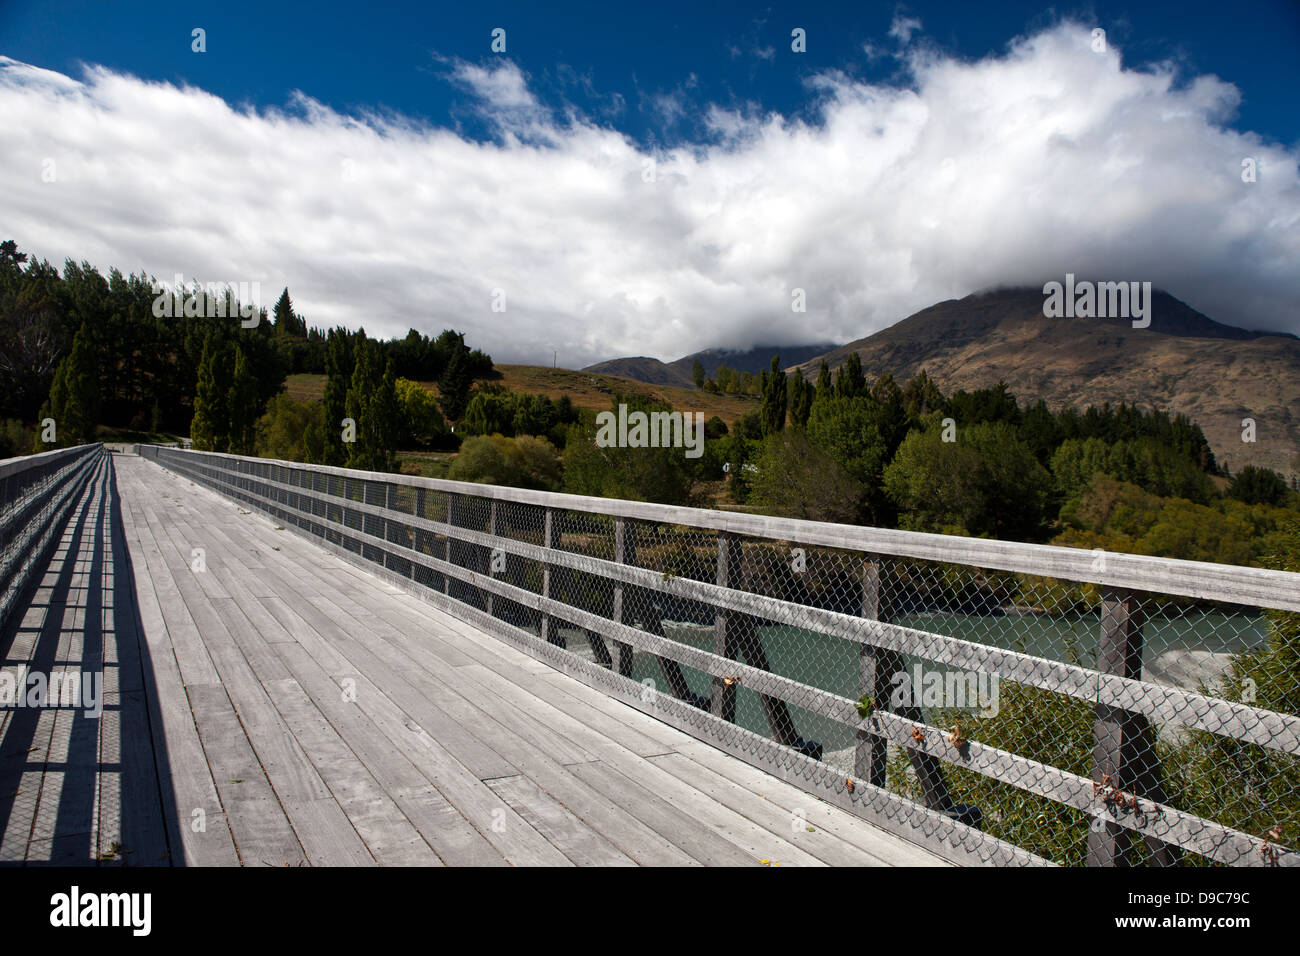 A wooden bridge crossing a river, near Queenstown, South Island, New Zealand Stock Photo